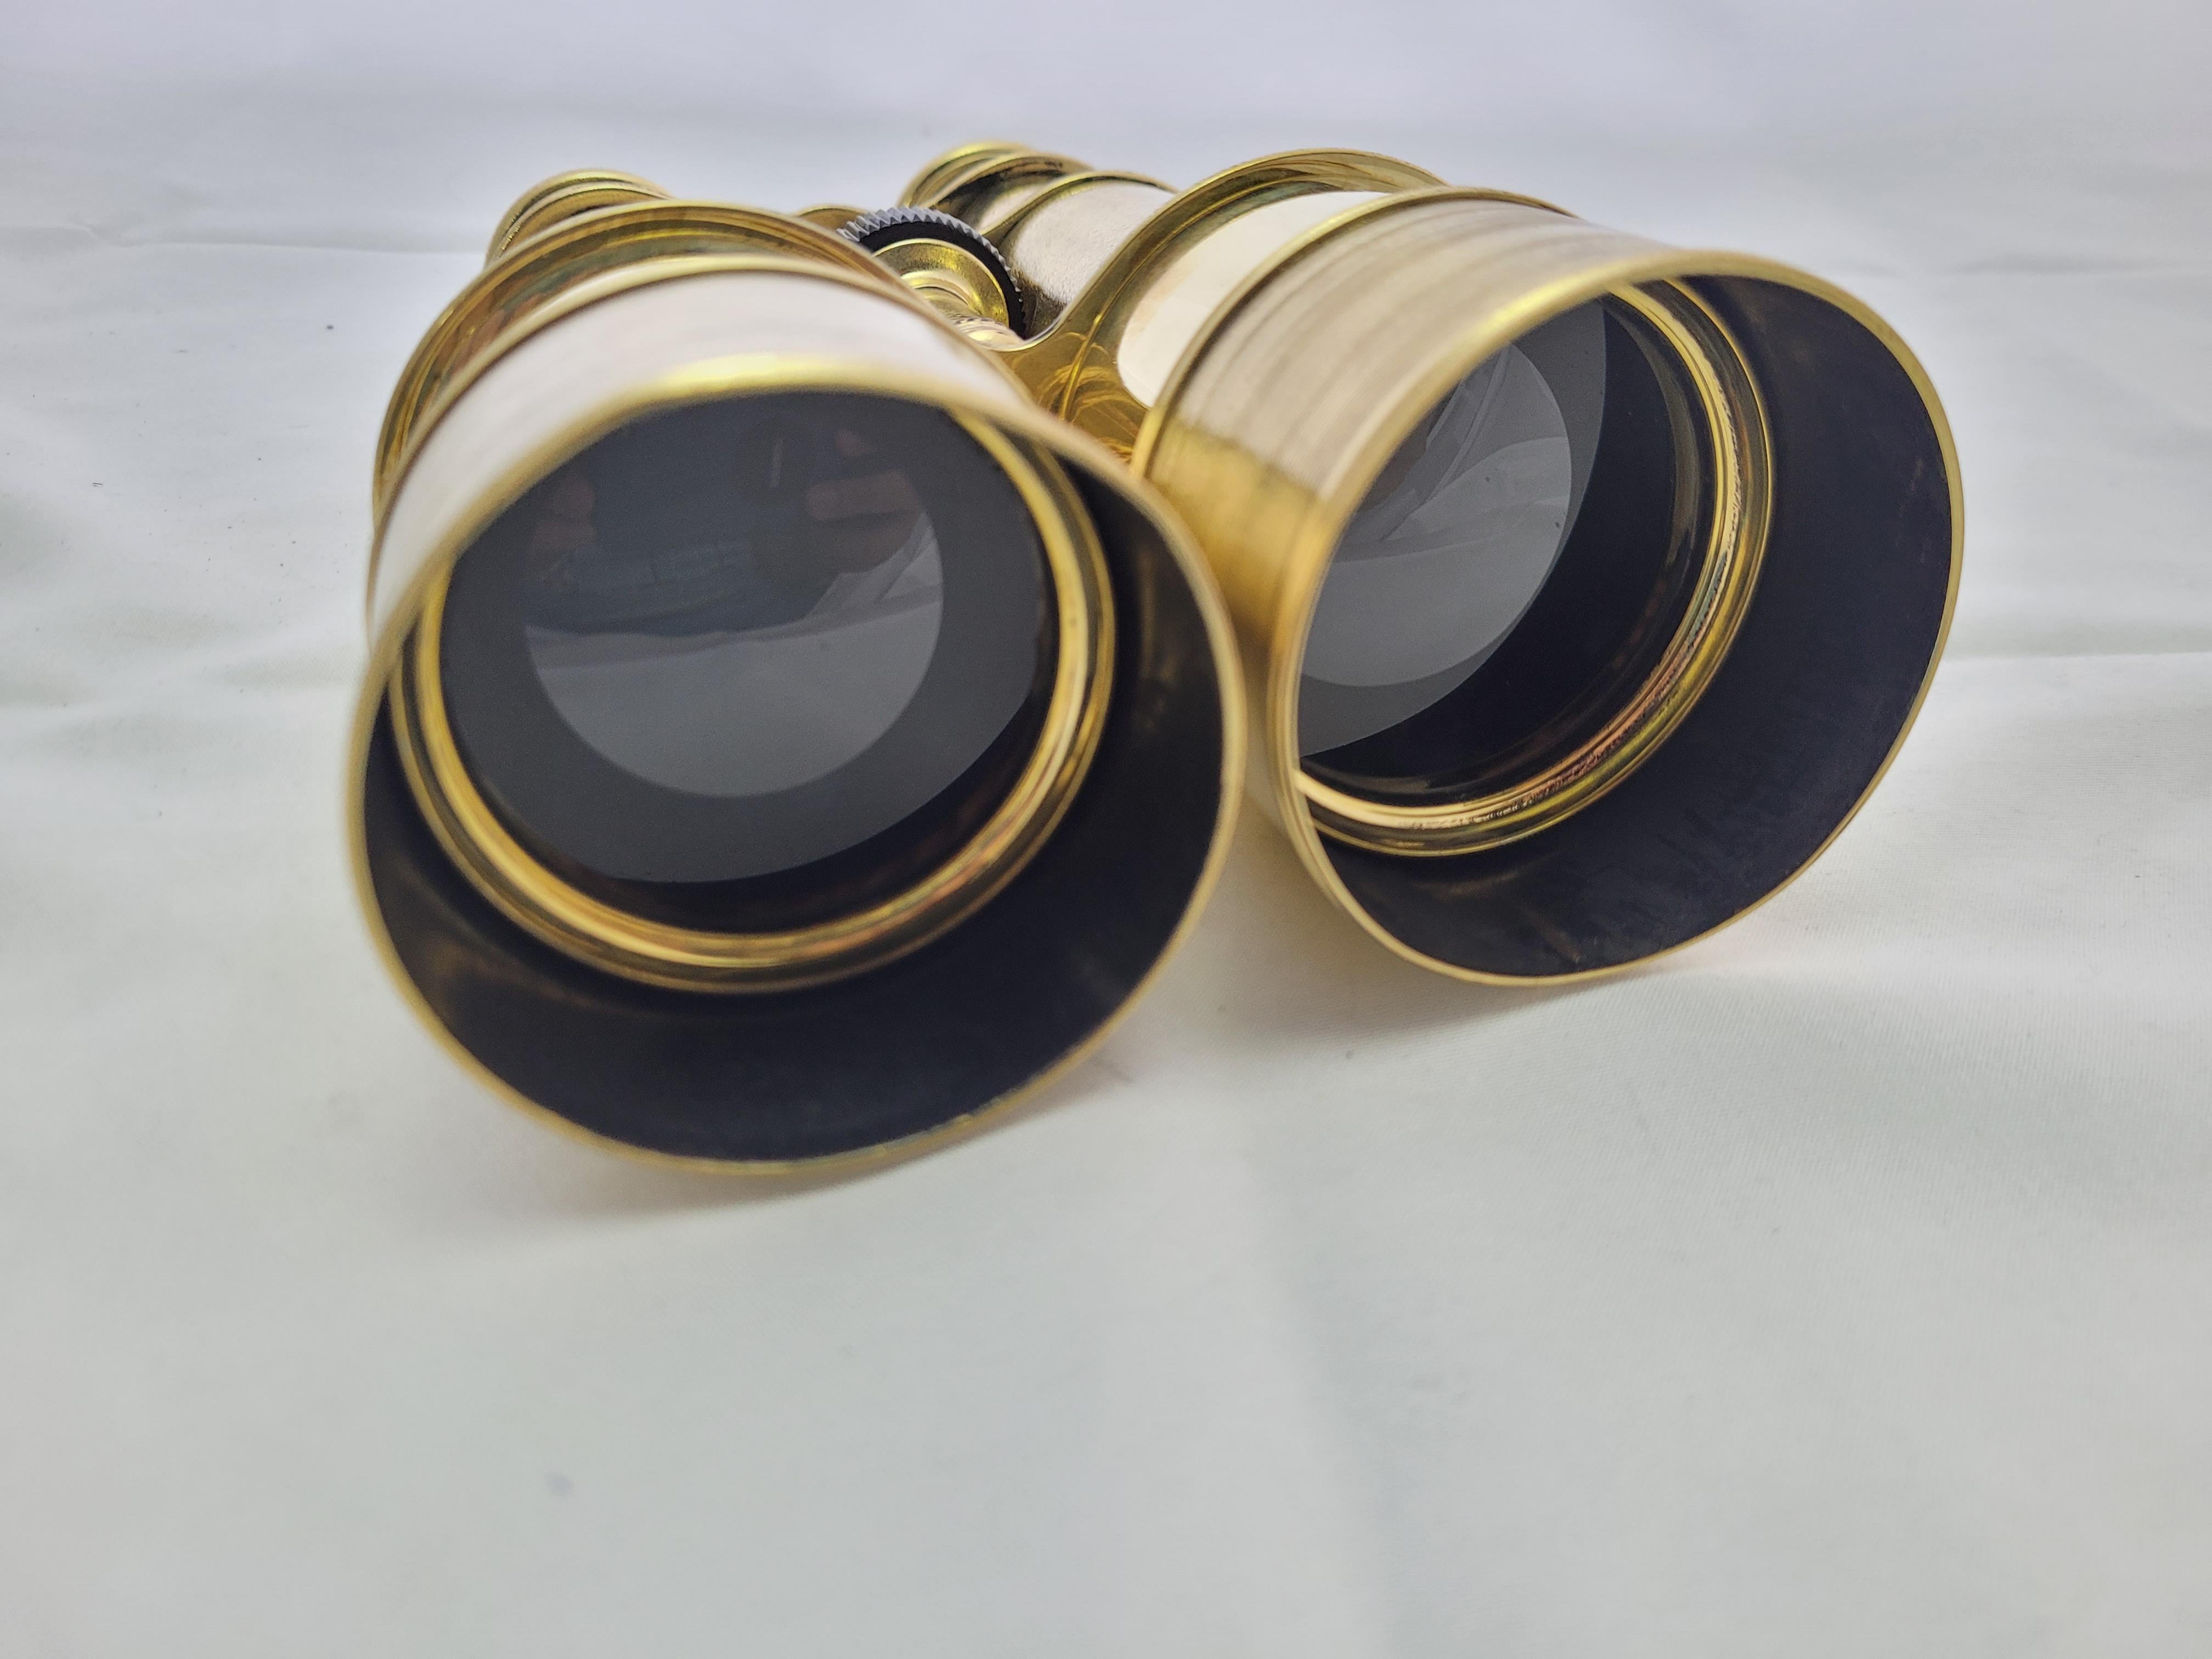 French Yachting Binoculars by Lemaire Fabt, Paris 5